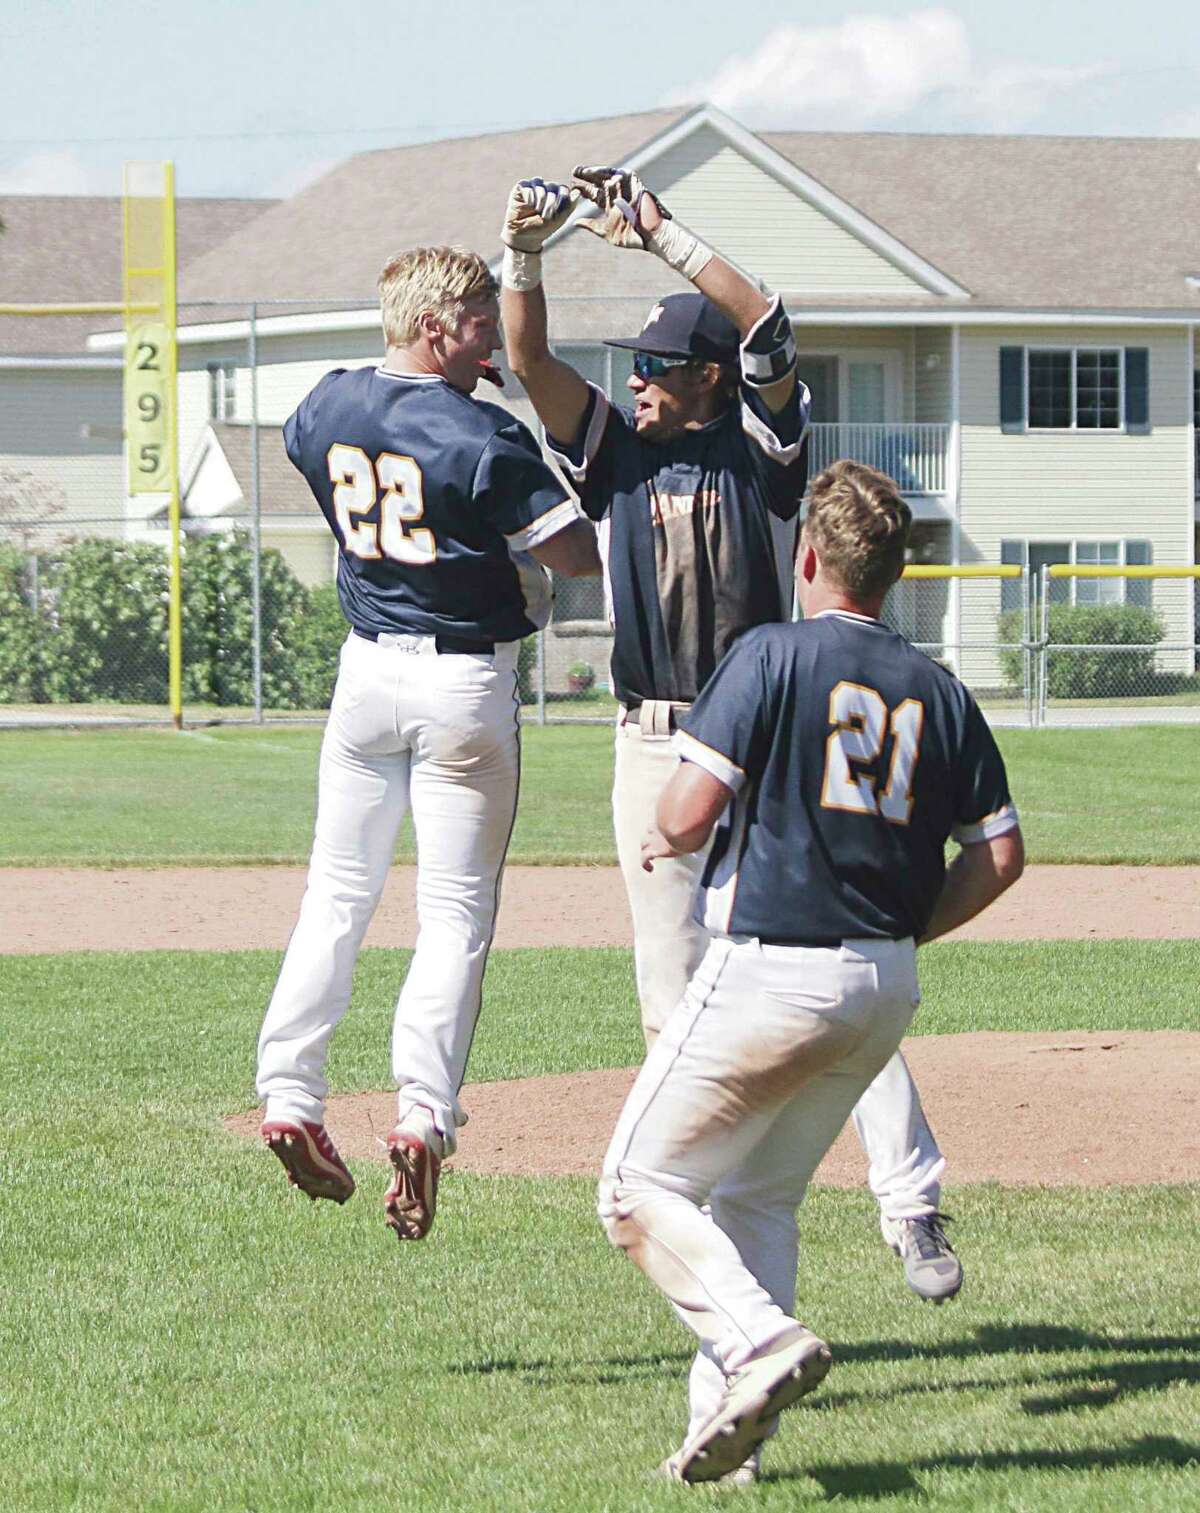 The Manistee Saints celebrate their walk-off win Sunday that salvaged a series split with the Oil City Stags. (Dylan Savela/News Advocate)